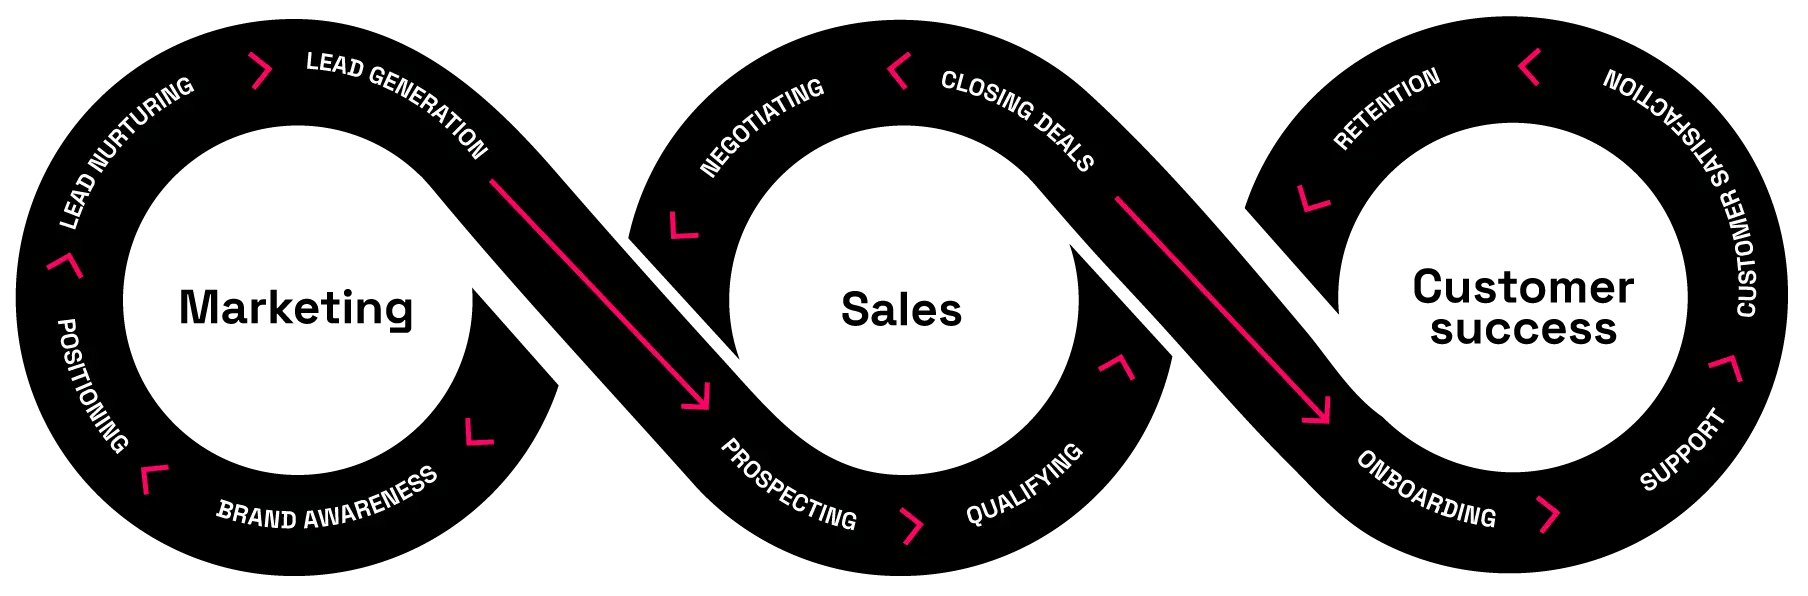 Marketing and Sales Alignement